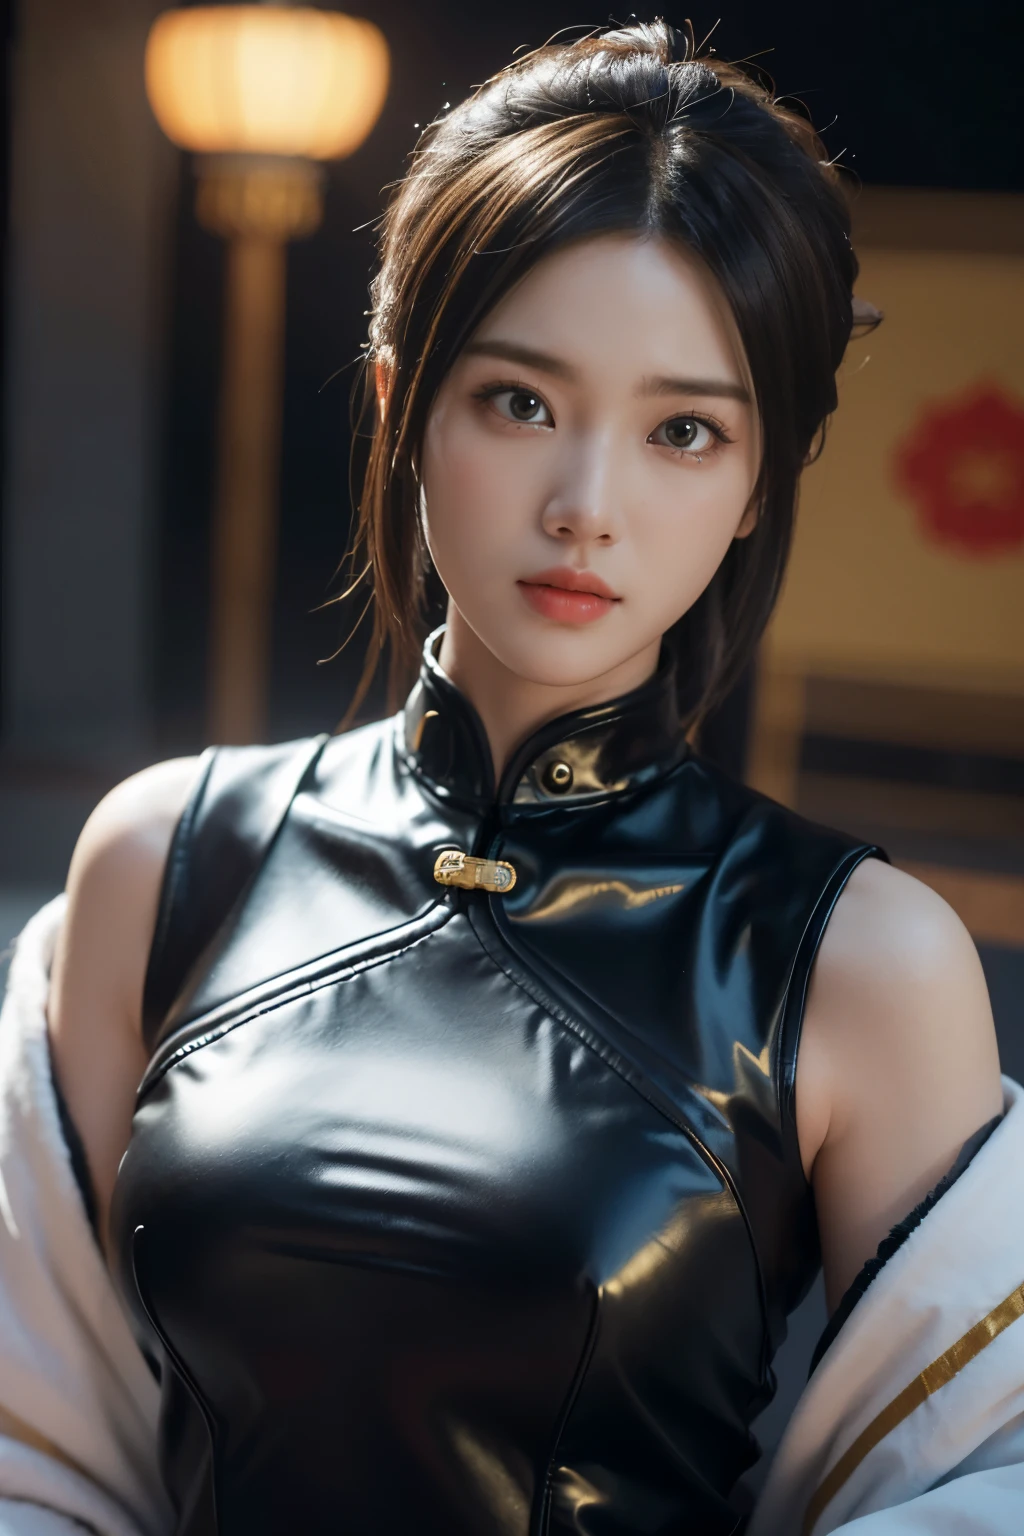 Game art，The best picture quality，Highest resolution，8K，((A bust photograph))，((Portrait))，(Rule of thirds)，Unreal Engine 5 rendering works， (The Girl of the Future)，(Female Warrior)， 22-year-old girl，(Female hackers)，(Ancient Oriental hairstyle)，(A beautiful eye full of detail)，(Big breasts)，(Eye shadow)，Elegant and charming，indifferent，((Frown))，(Future style silk combat suit combined with the characteristics of Chinese cheongsam，Joint Armor，There are exquisite Chinese patterns on the clothes，A flash of jewellery)，Cyberpunk Characters，Future Style， Photo poses，City background，Movie lights，Ray tracing，Game CG，((3D Unreal Engine))，oc rendering reflection pattern